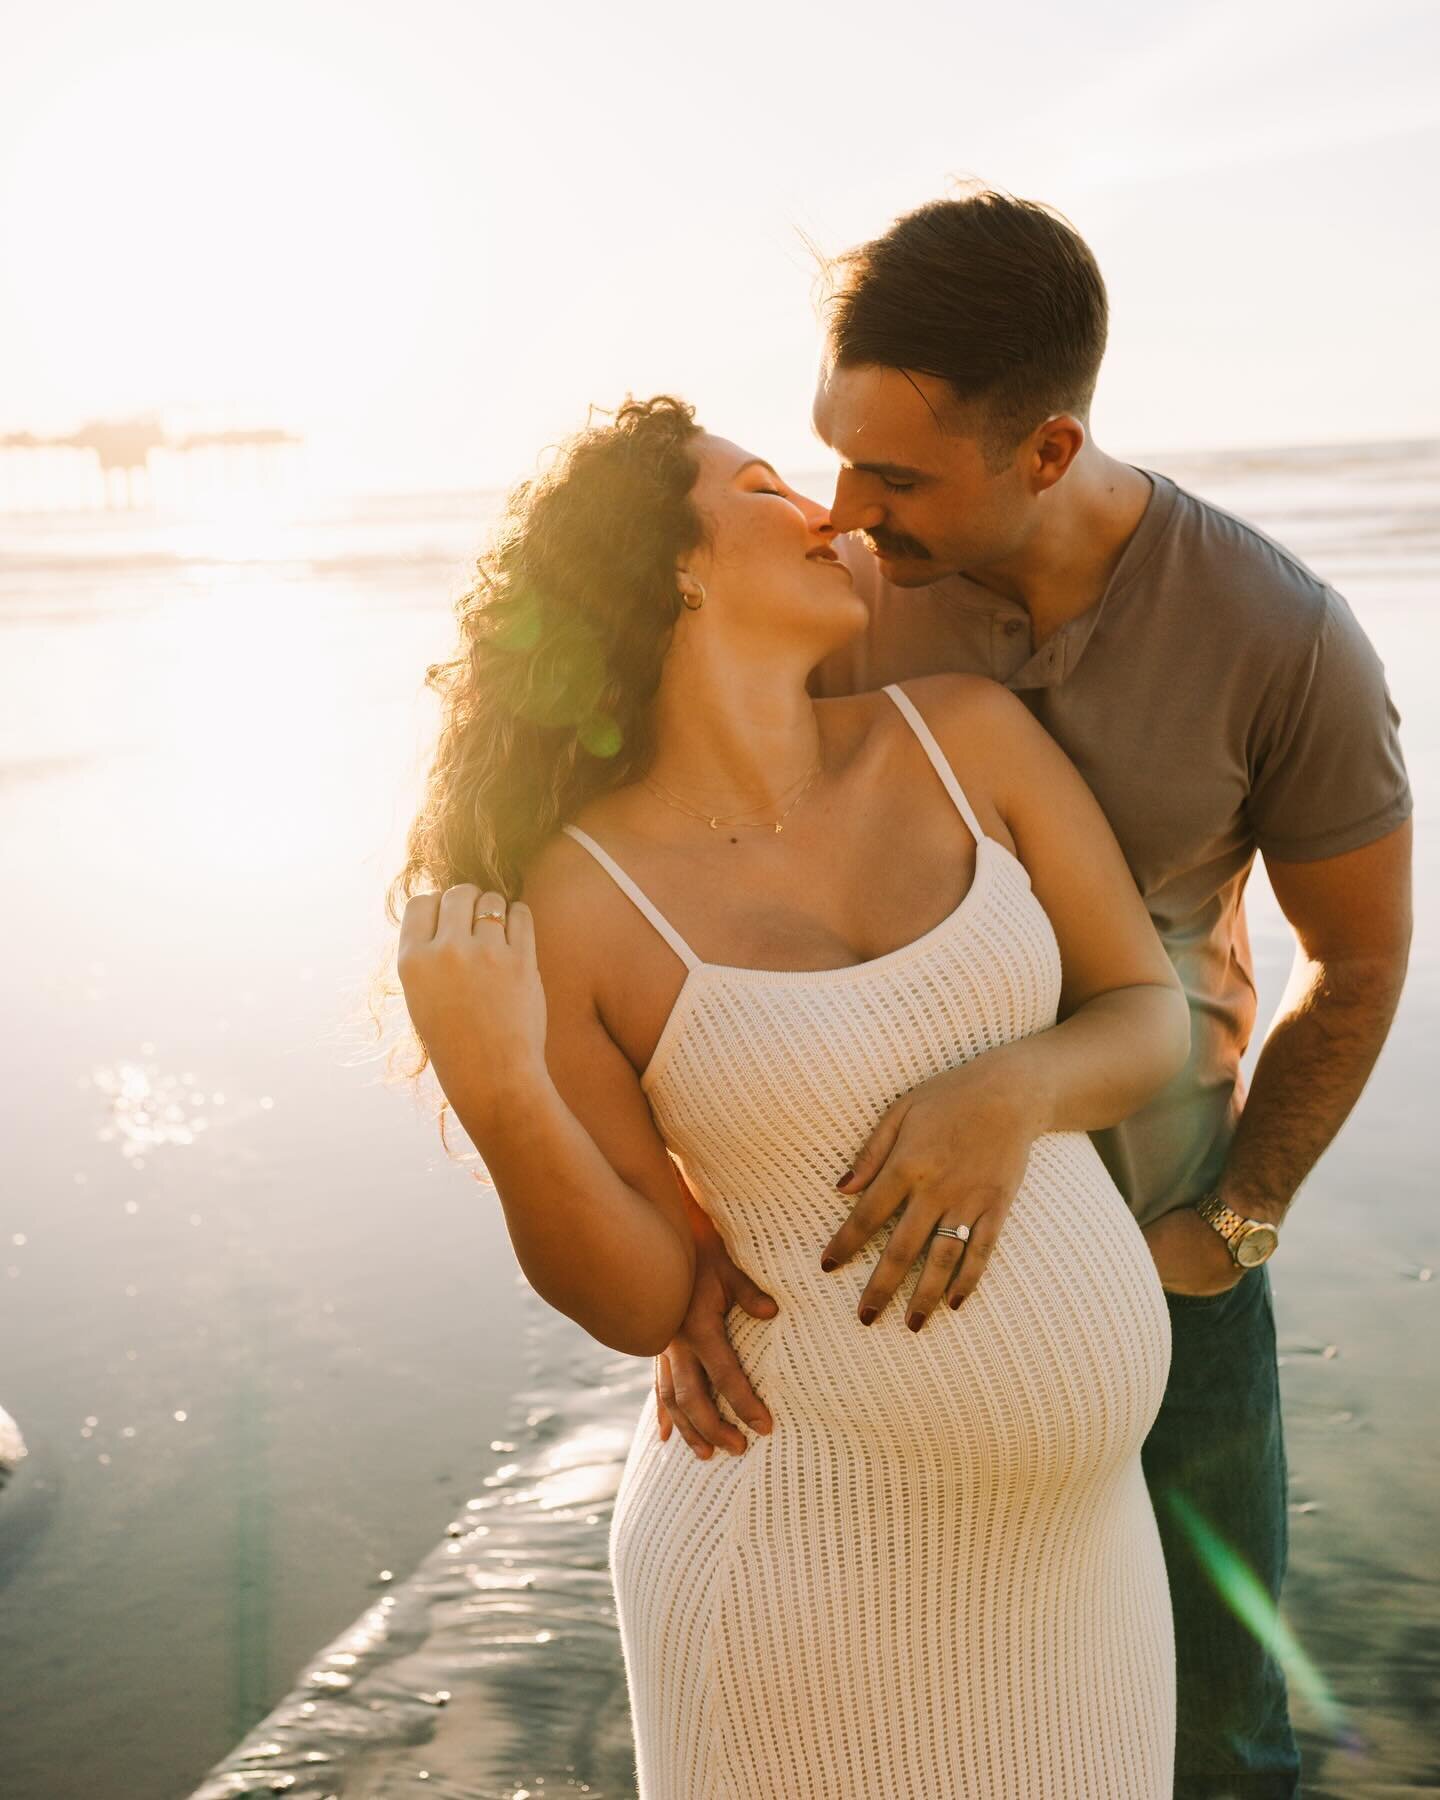 Baby on the way, ✨ and those soft, calm, romantic moments melting into one another as the waves softly crashed, is just what this mama wanted for their session. Could this backdrop be any more perfect for my wonderful clients!? SoCal winter was showi